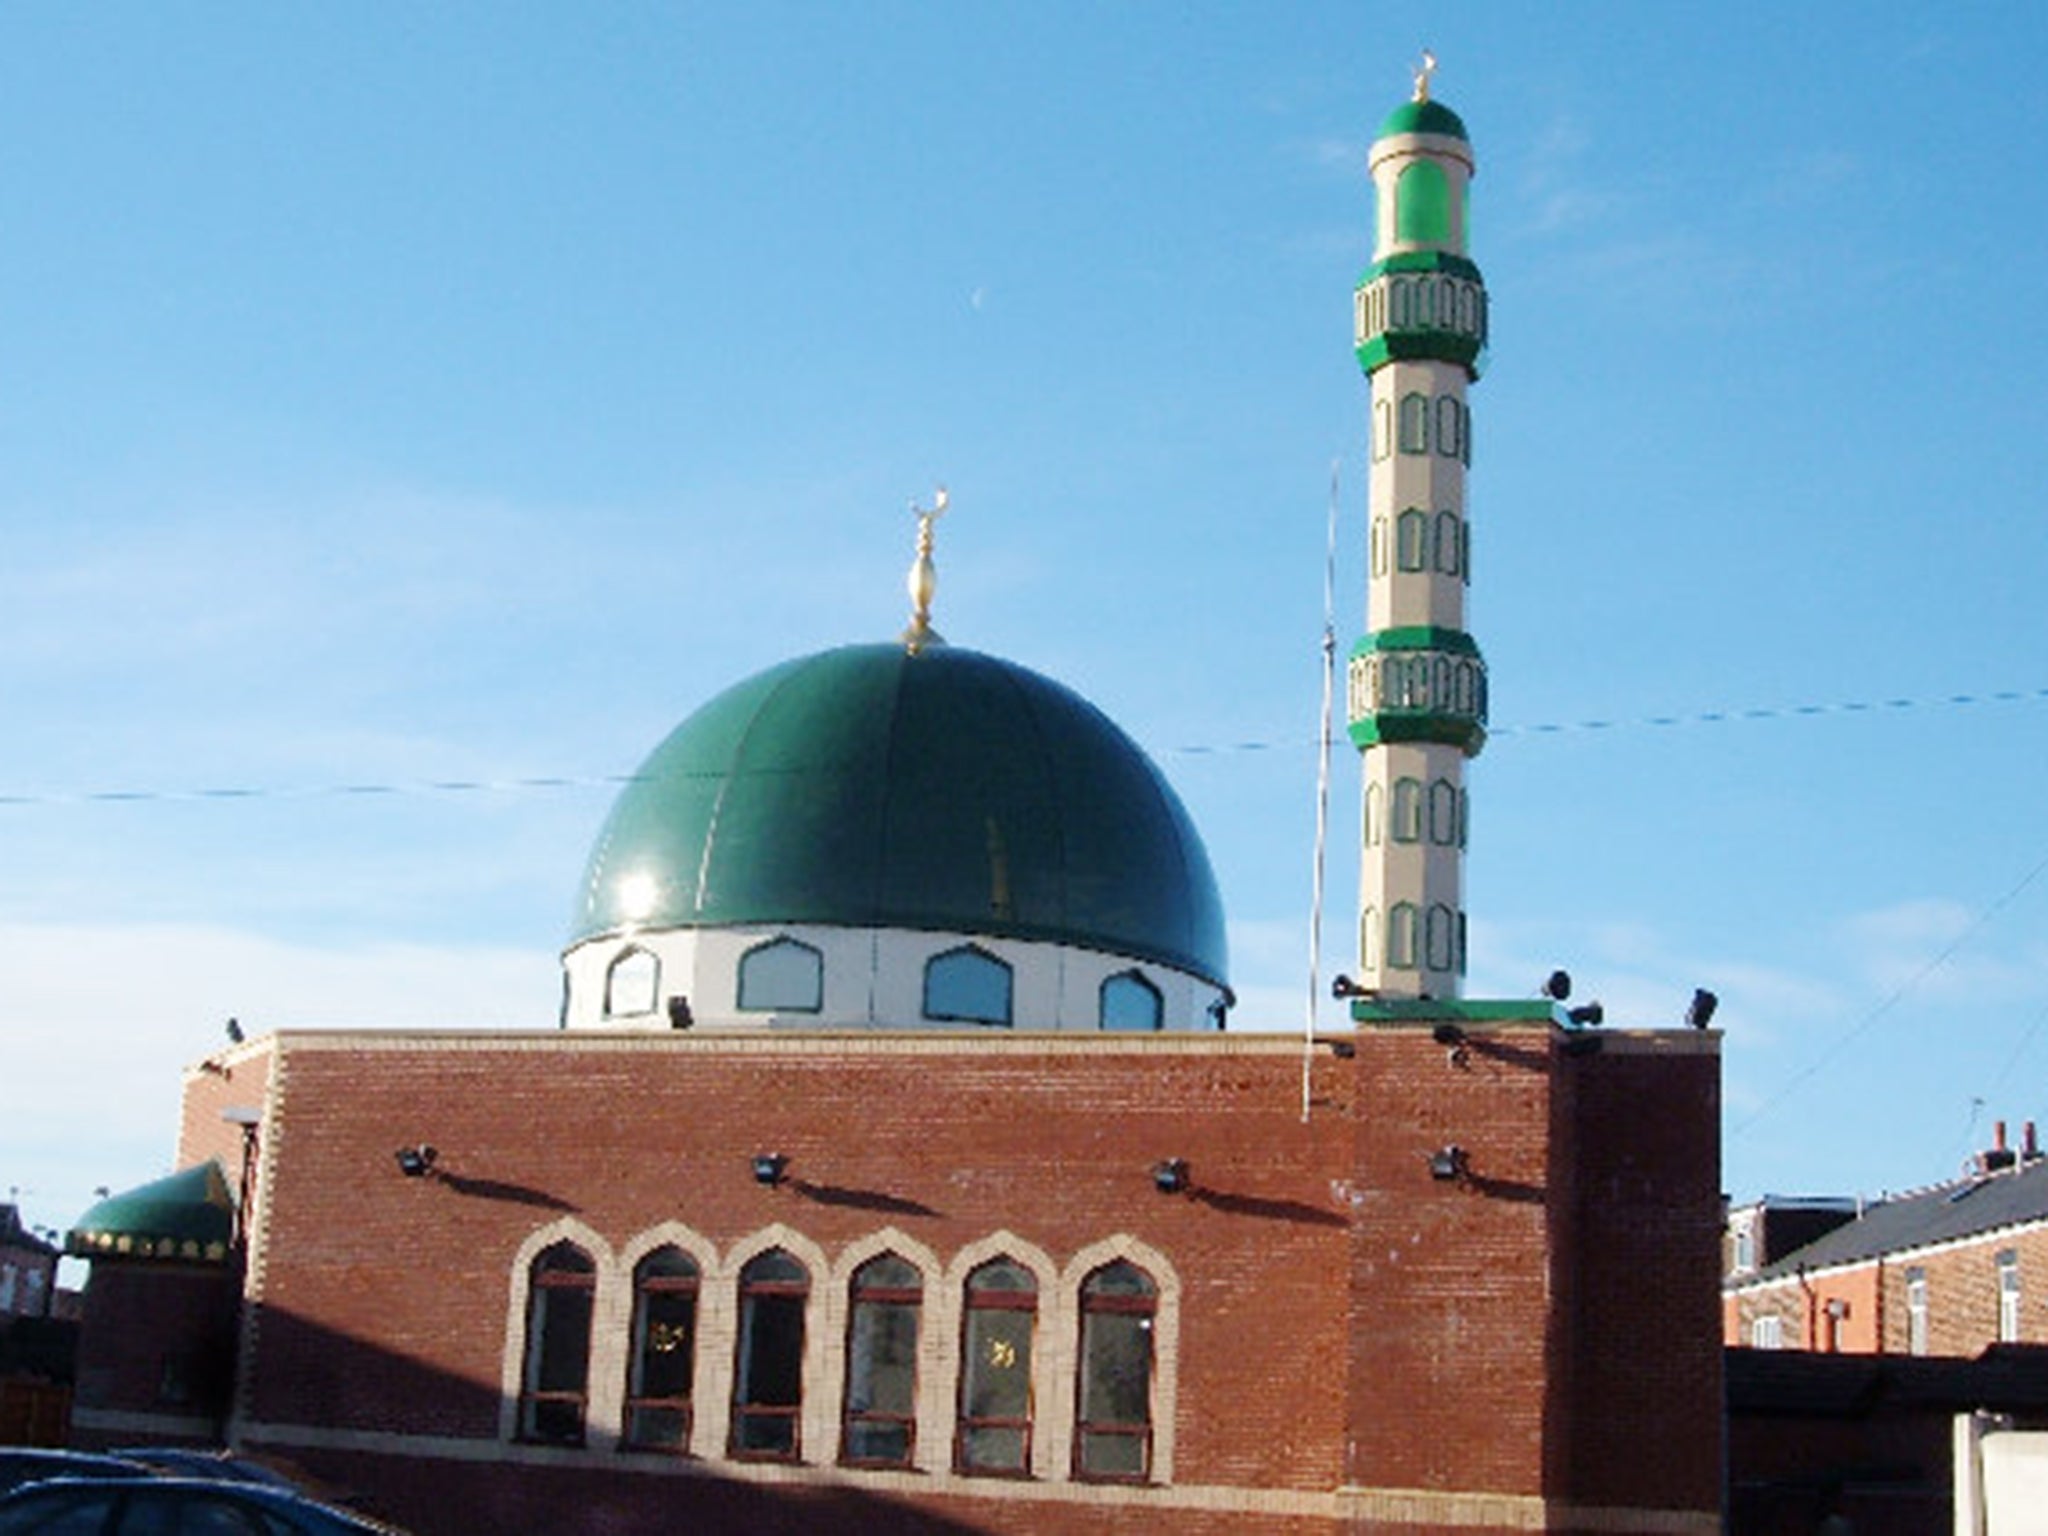 Mr Uddin was the former imam of the Jalalia Jaame Mosque